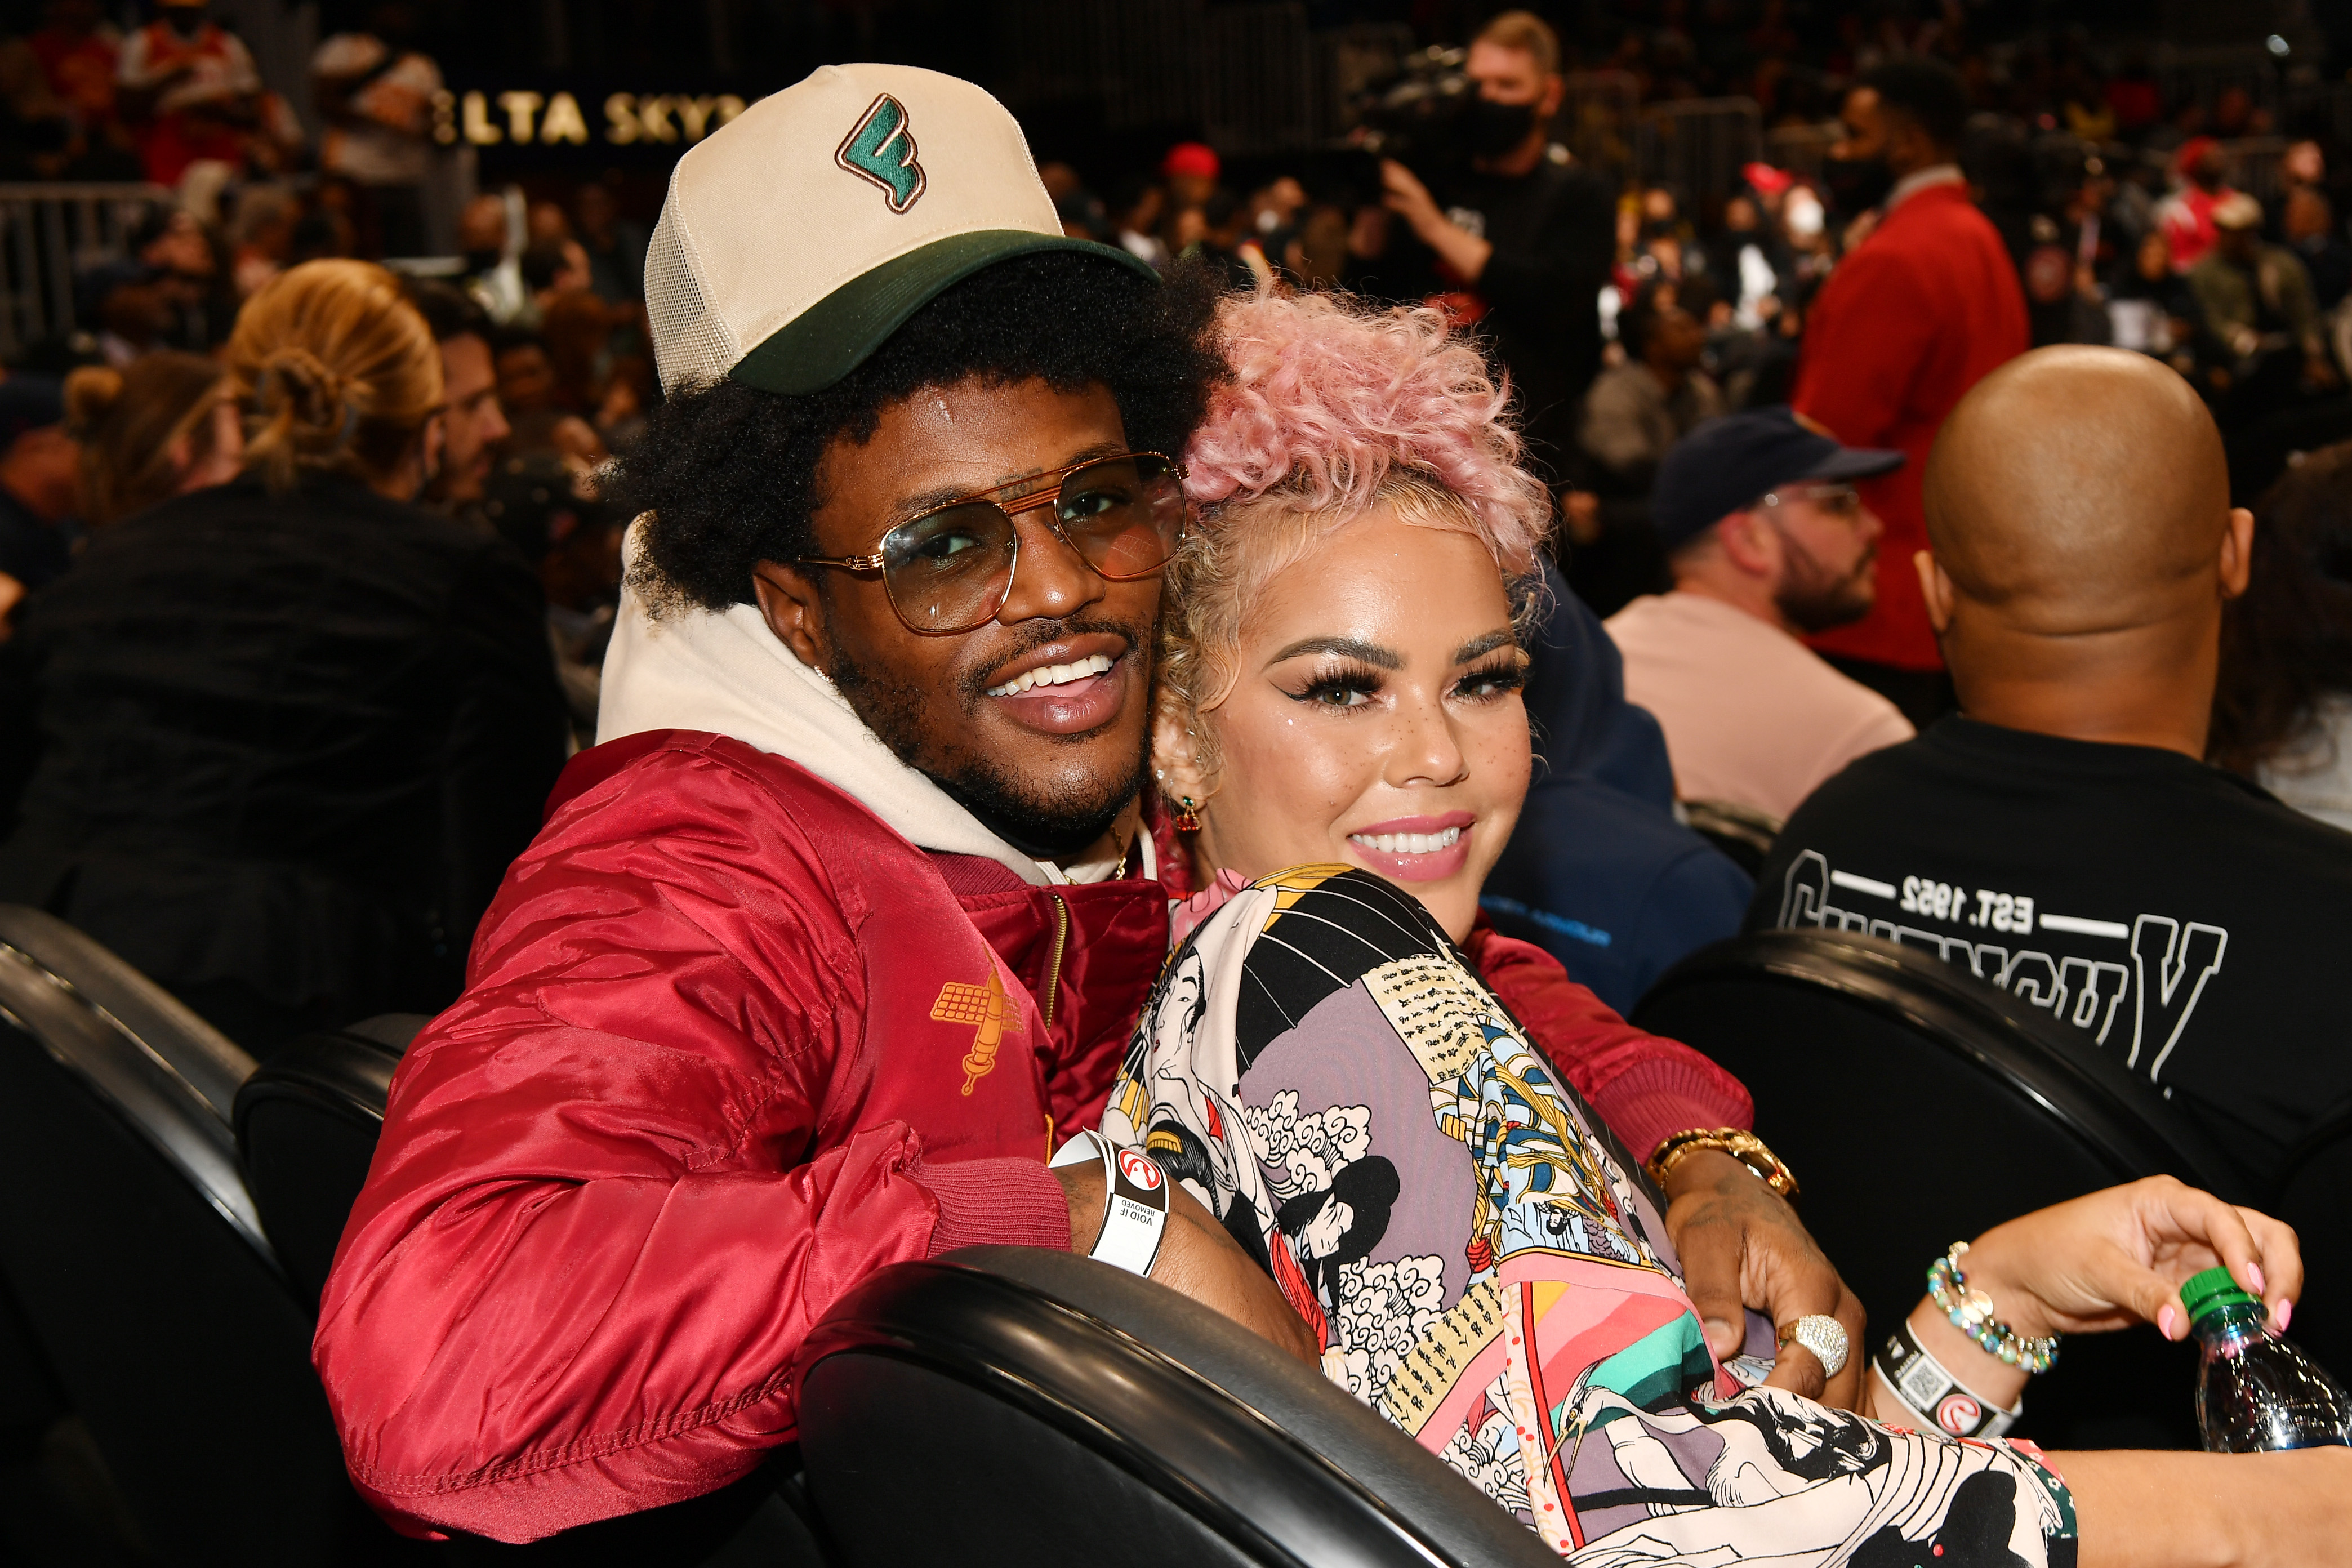 DC Young Fly and Jacky Oh attend the game between the Denver Nuggets and the Atlanta Hawks at State Farm Arena on December 17, 2021, in Atlanta, Georgia. | Source: Getty Images